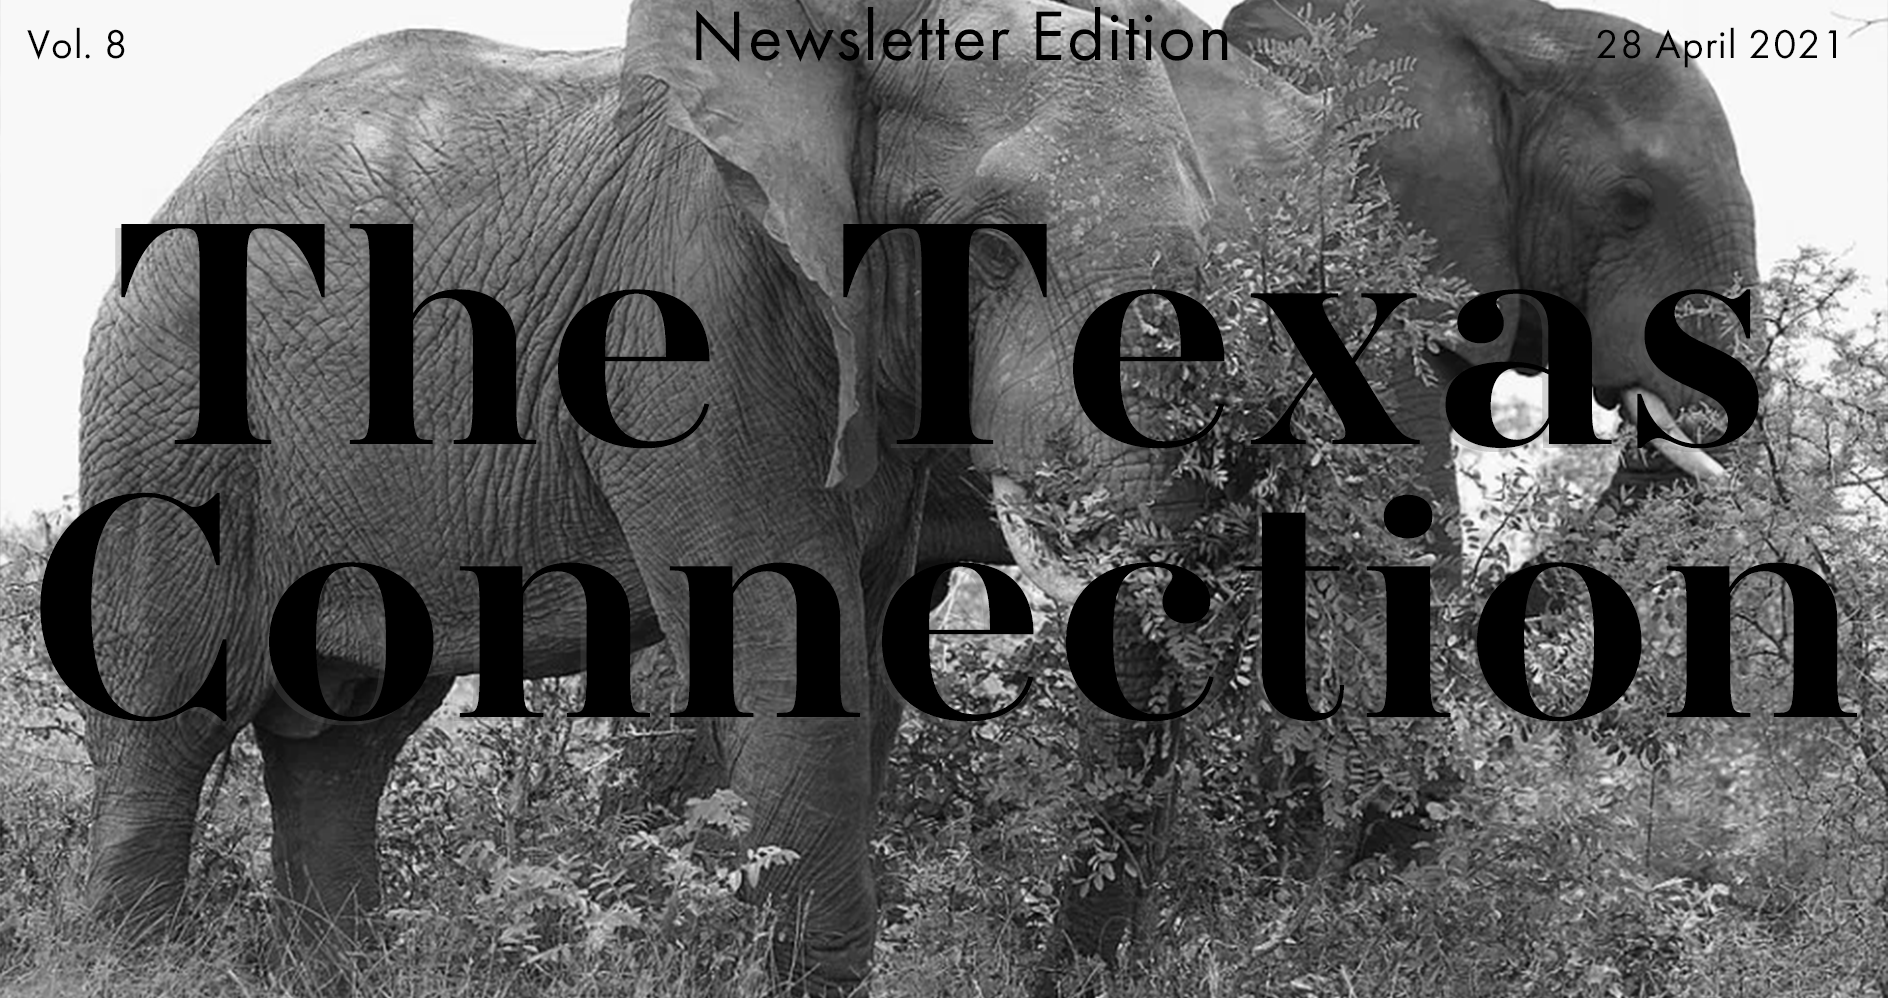 The Texas Connection Vol. 15